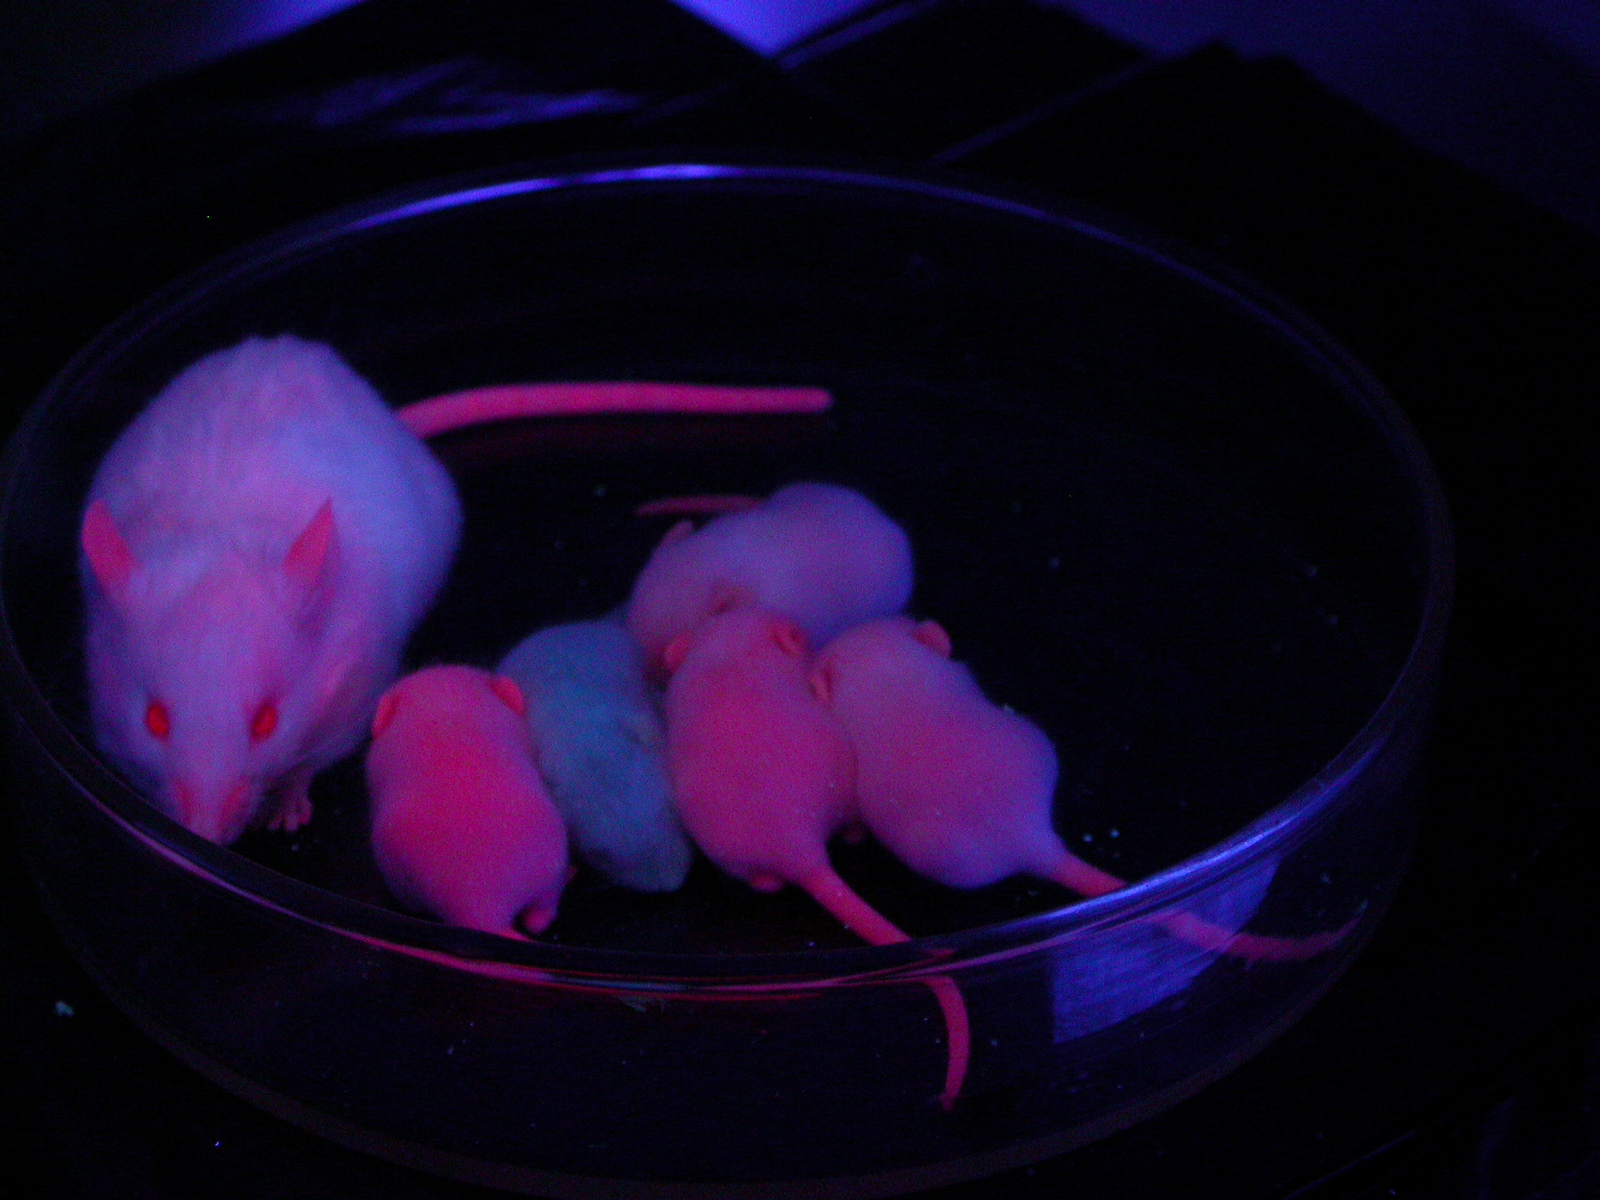 A female mouse and her pups. The mother carried a piggyBac transgene expressing red fluorescent proteins.